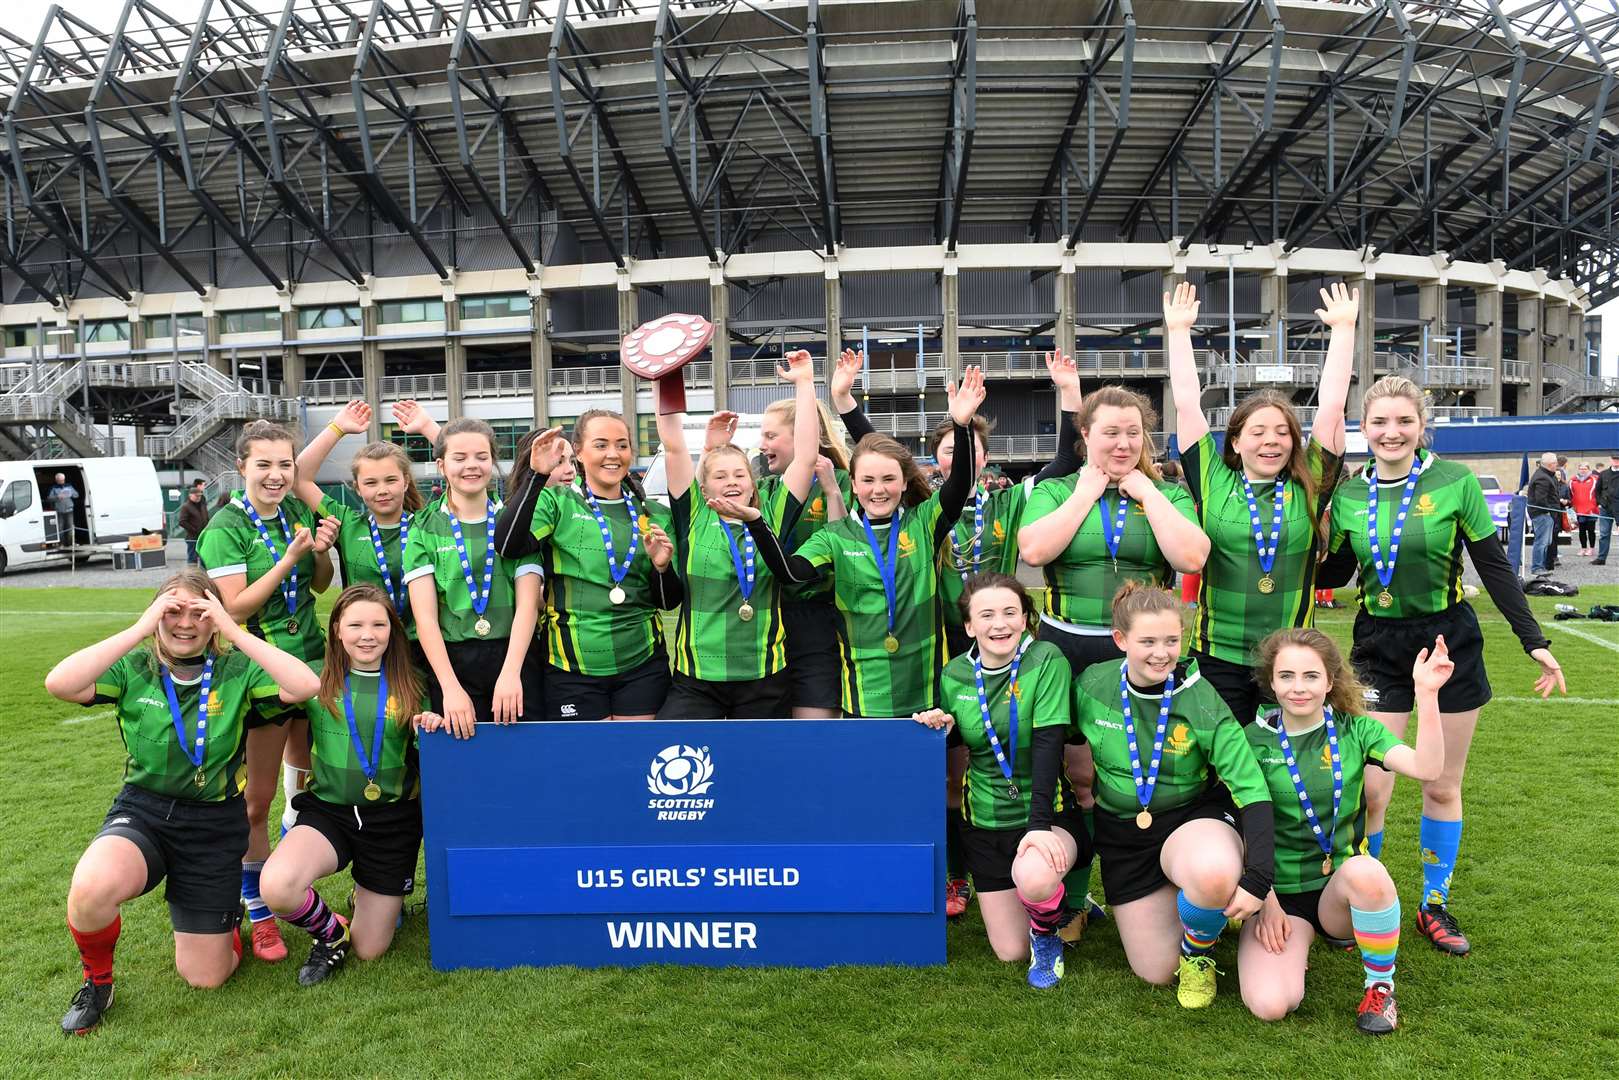 The Caithness team celebrating their success in the U15 Girls’ Shield at Murrayfield. Picture: Scottish Rugby / SNS